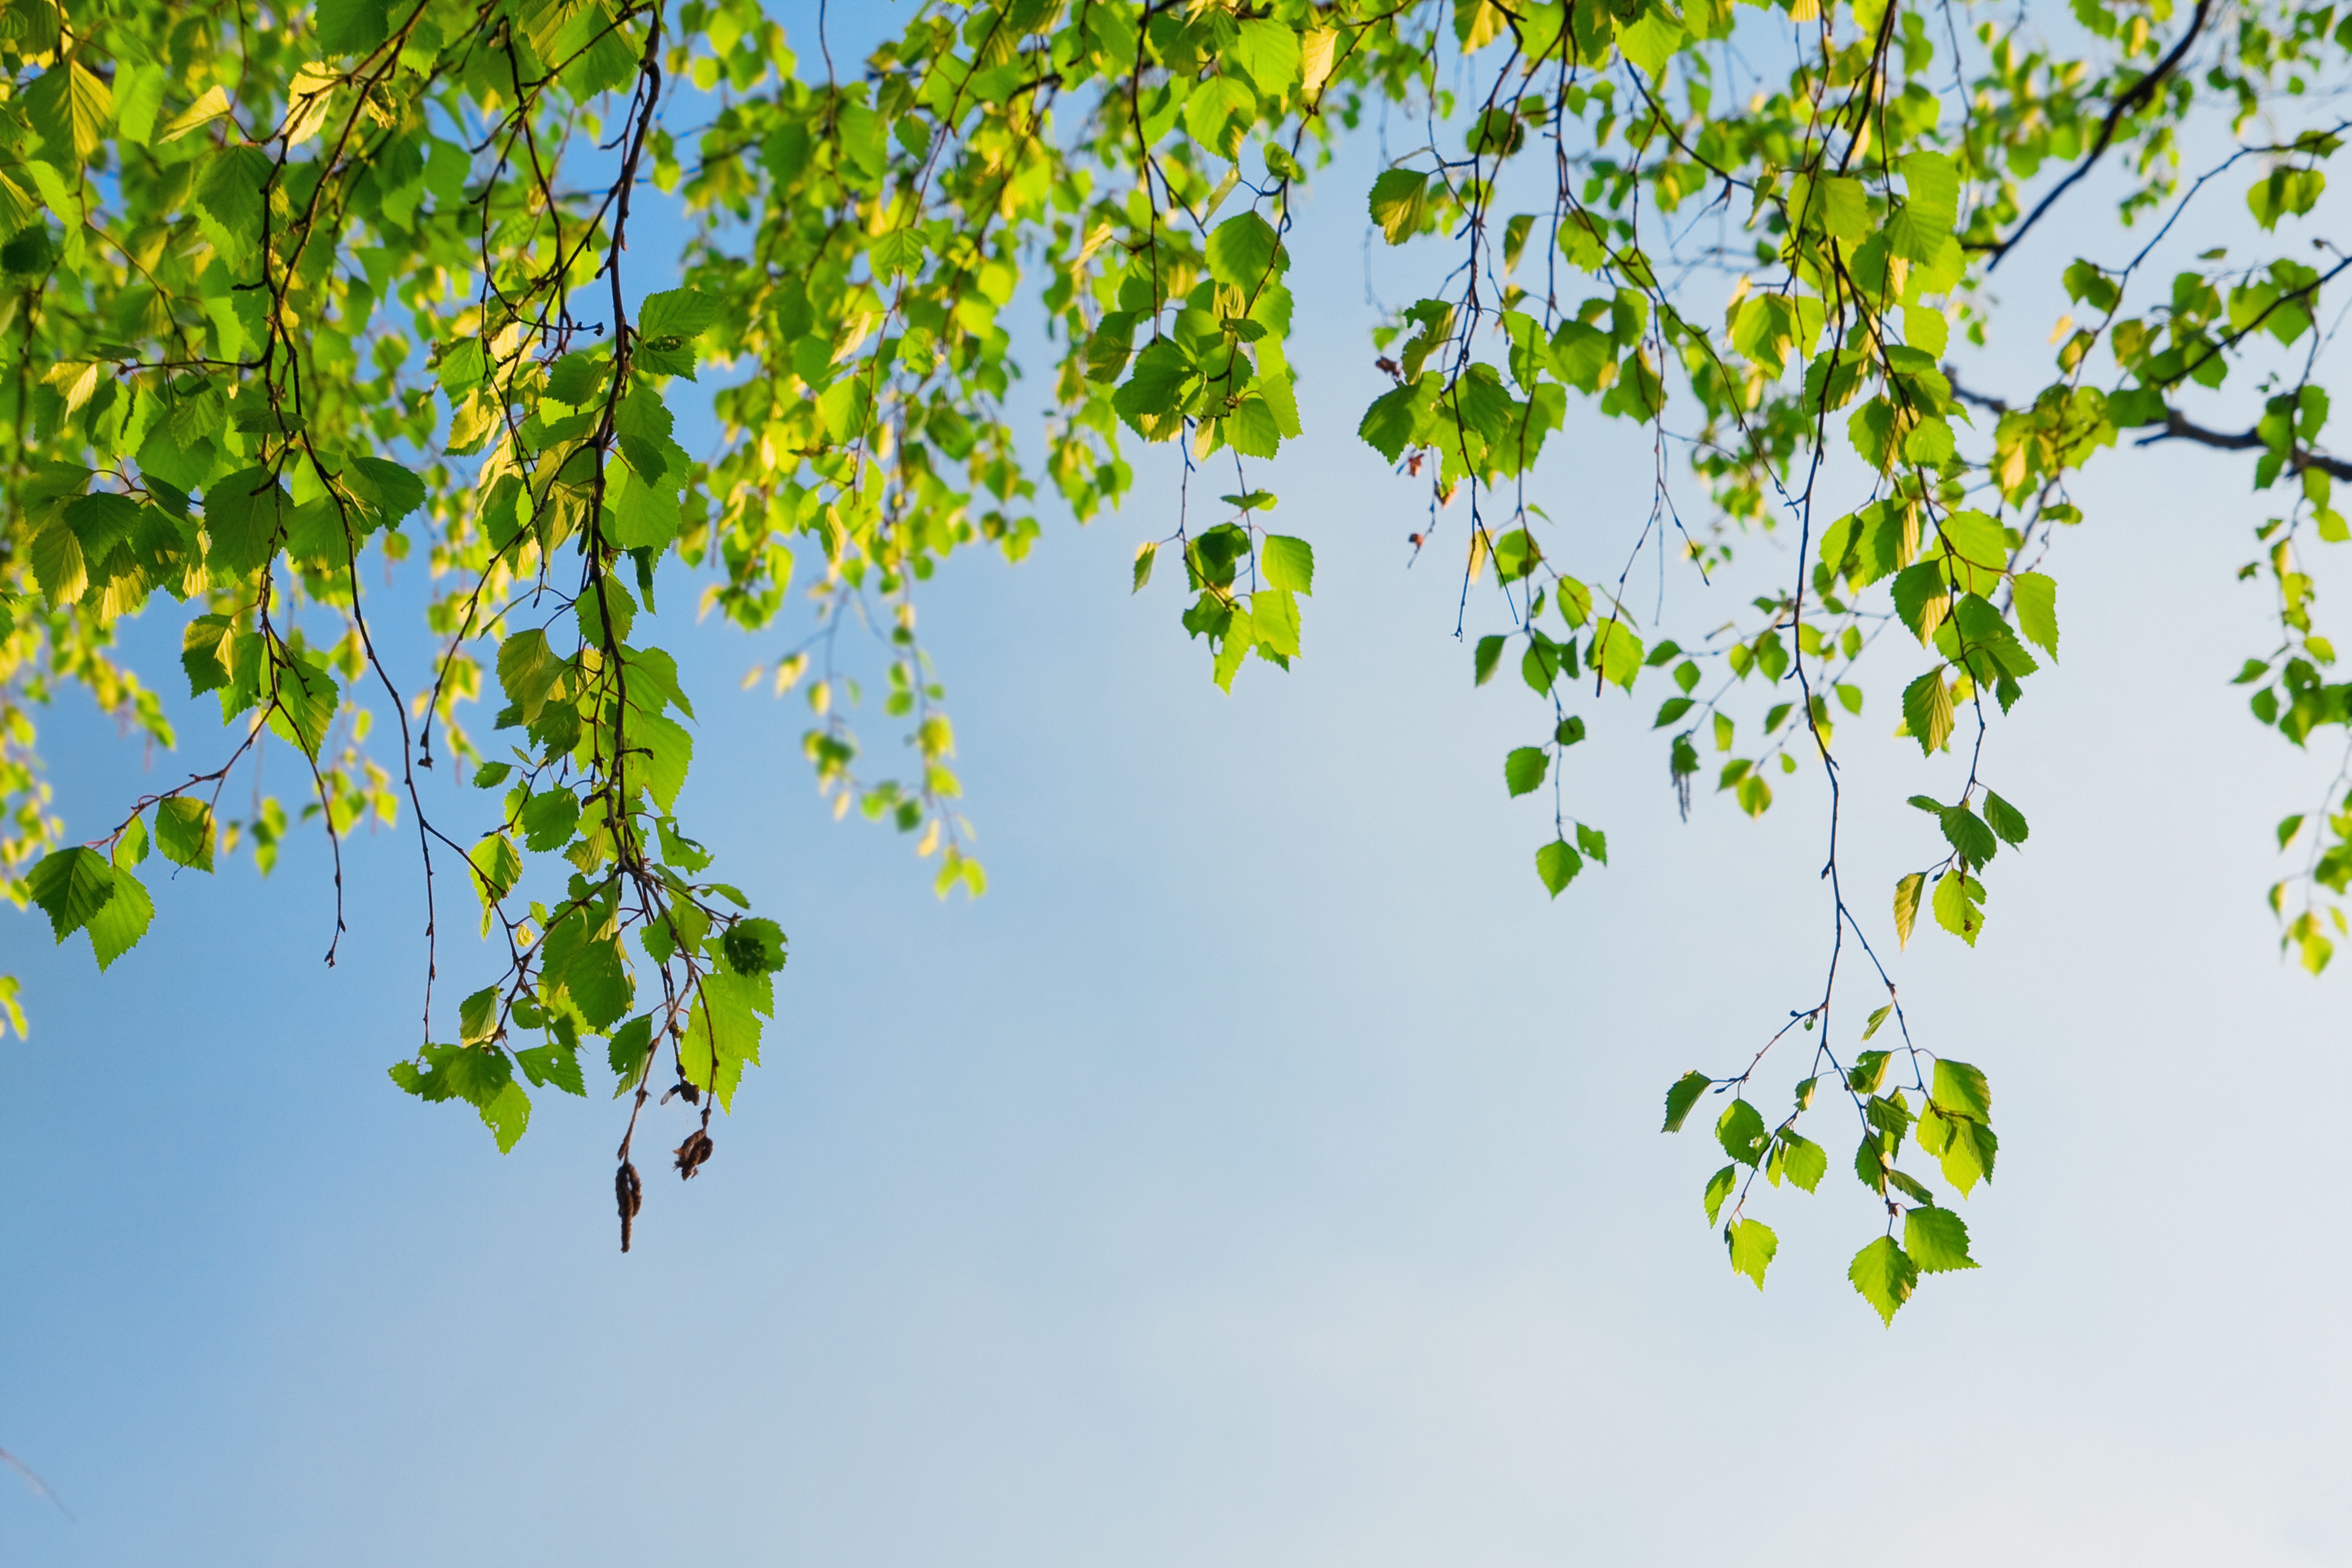 Image: Birch, branches, leaves, sky